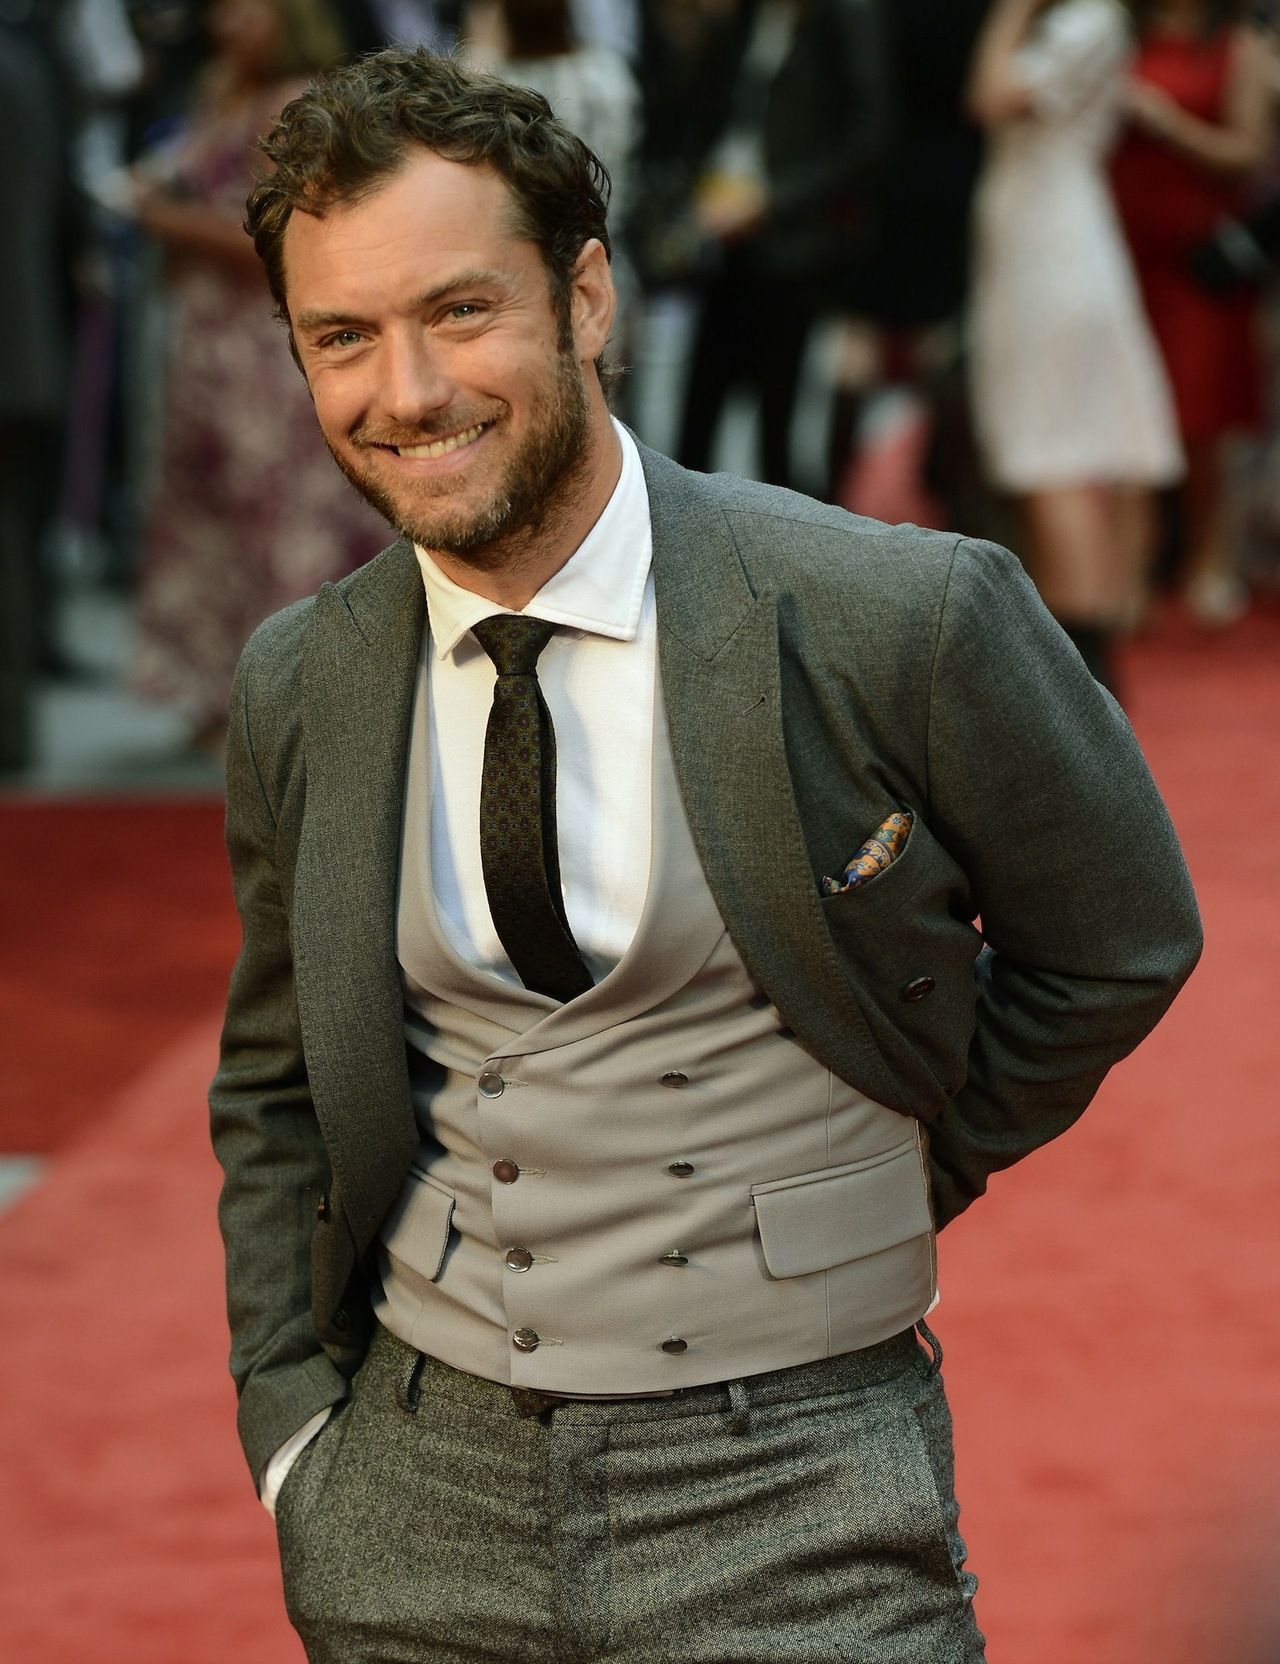 Jude Law at the Anna Karenina premiere on September 4, 2012 in London, UK